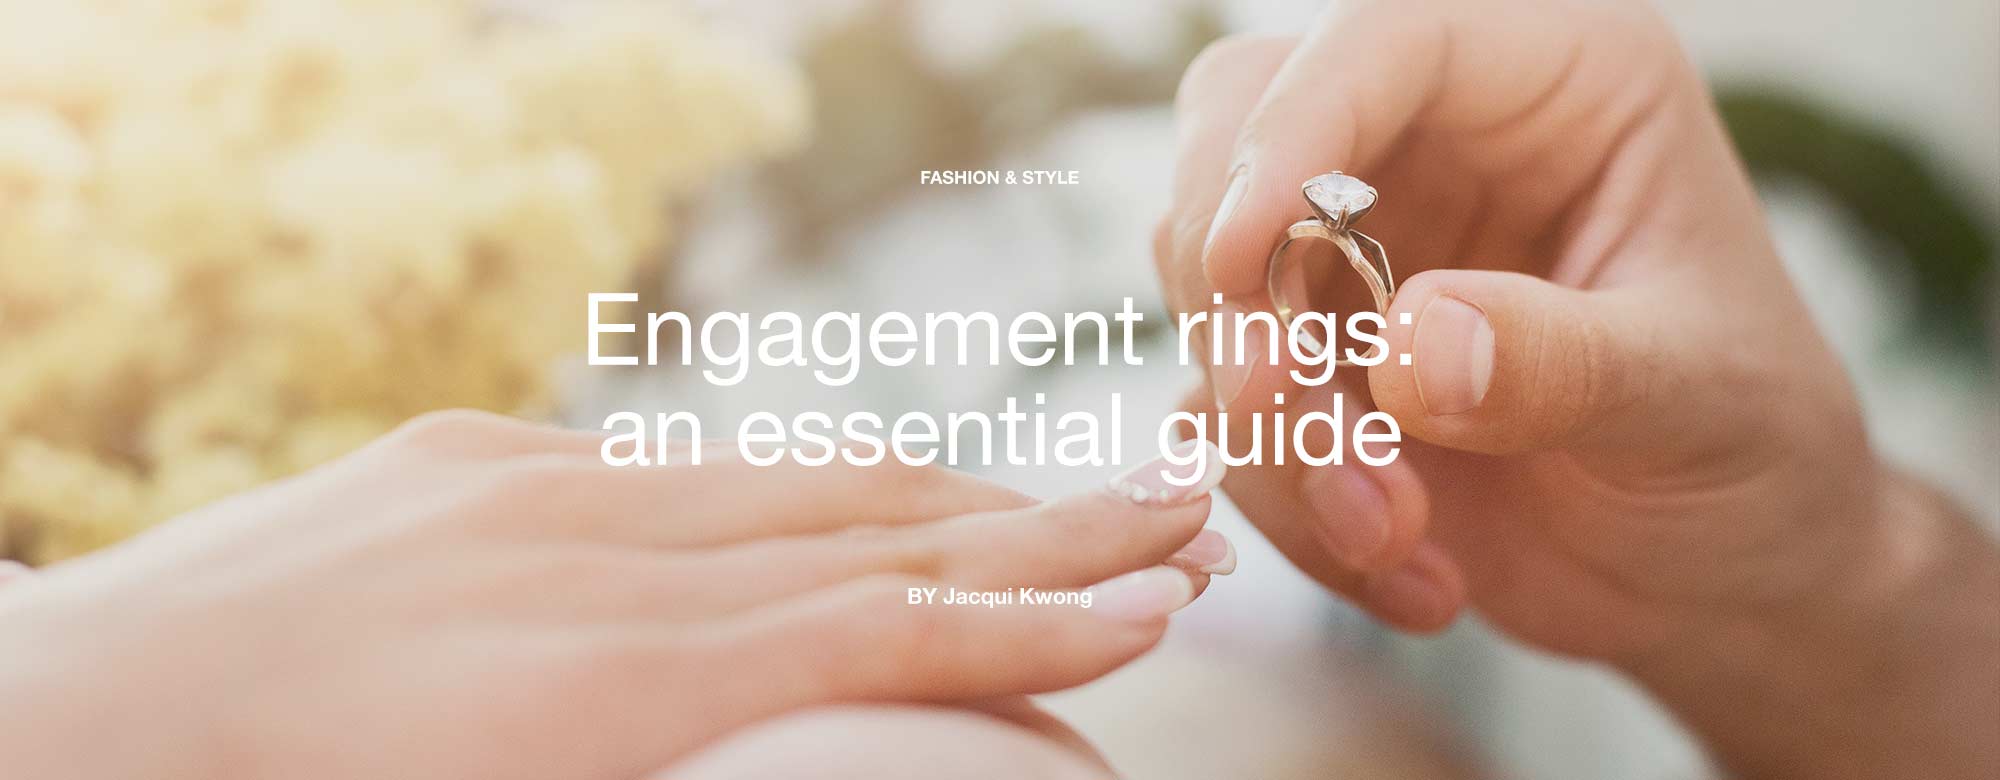 Engagement rings: an essential guide